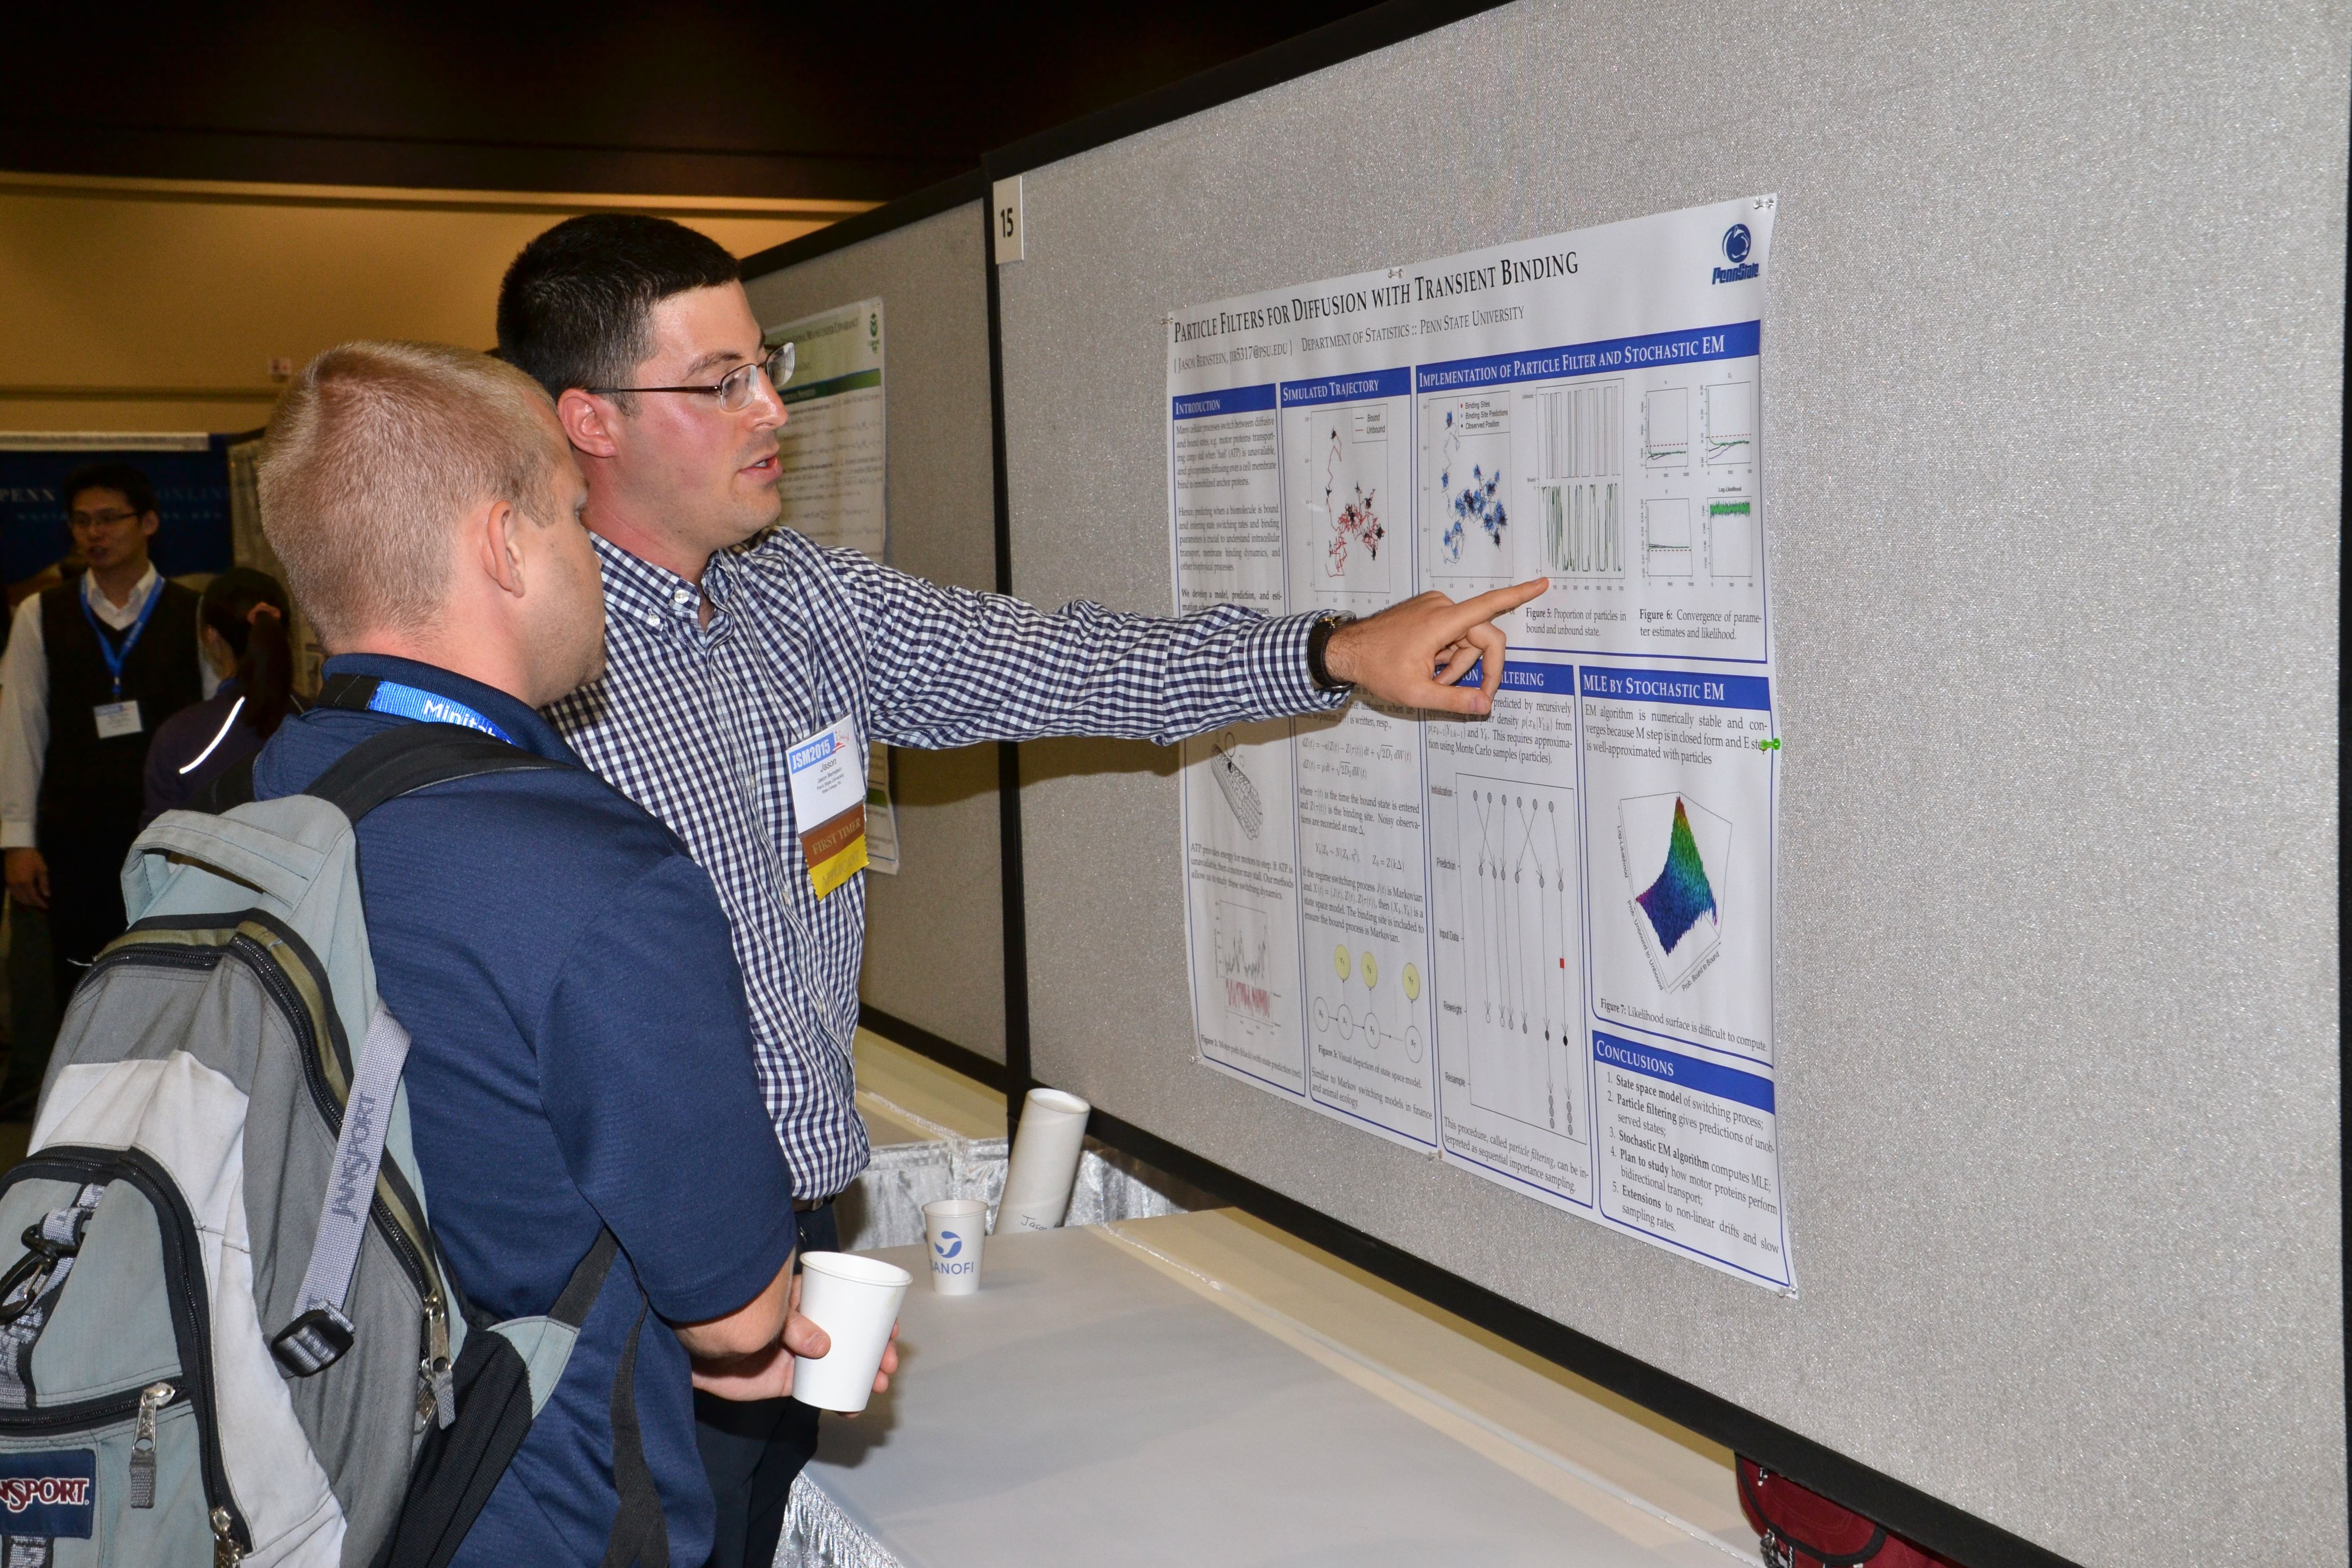 Jason Bernstein discusses his poster, "Analysis of Single Particle Diffusion with Transient Binding Using Particle Filtering."